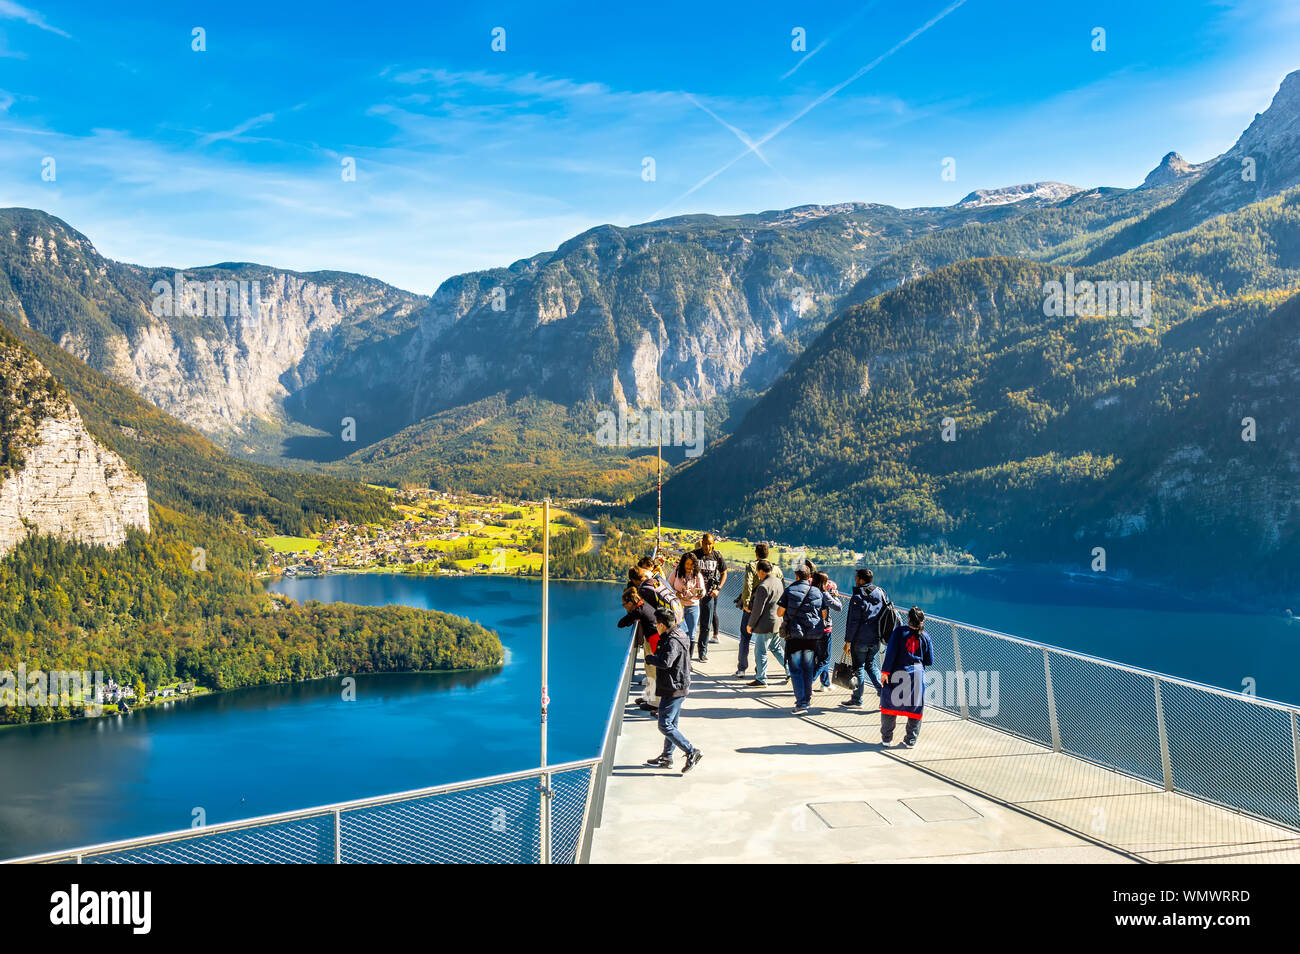 Hallstatt, Austria - OCT 2018: Tourists take photos and enjoy the view of the mountains and lake Hallstatter See from the World Heritage View Point. Stock Photo